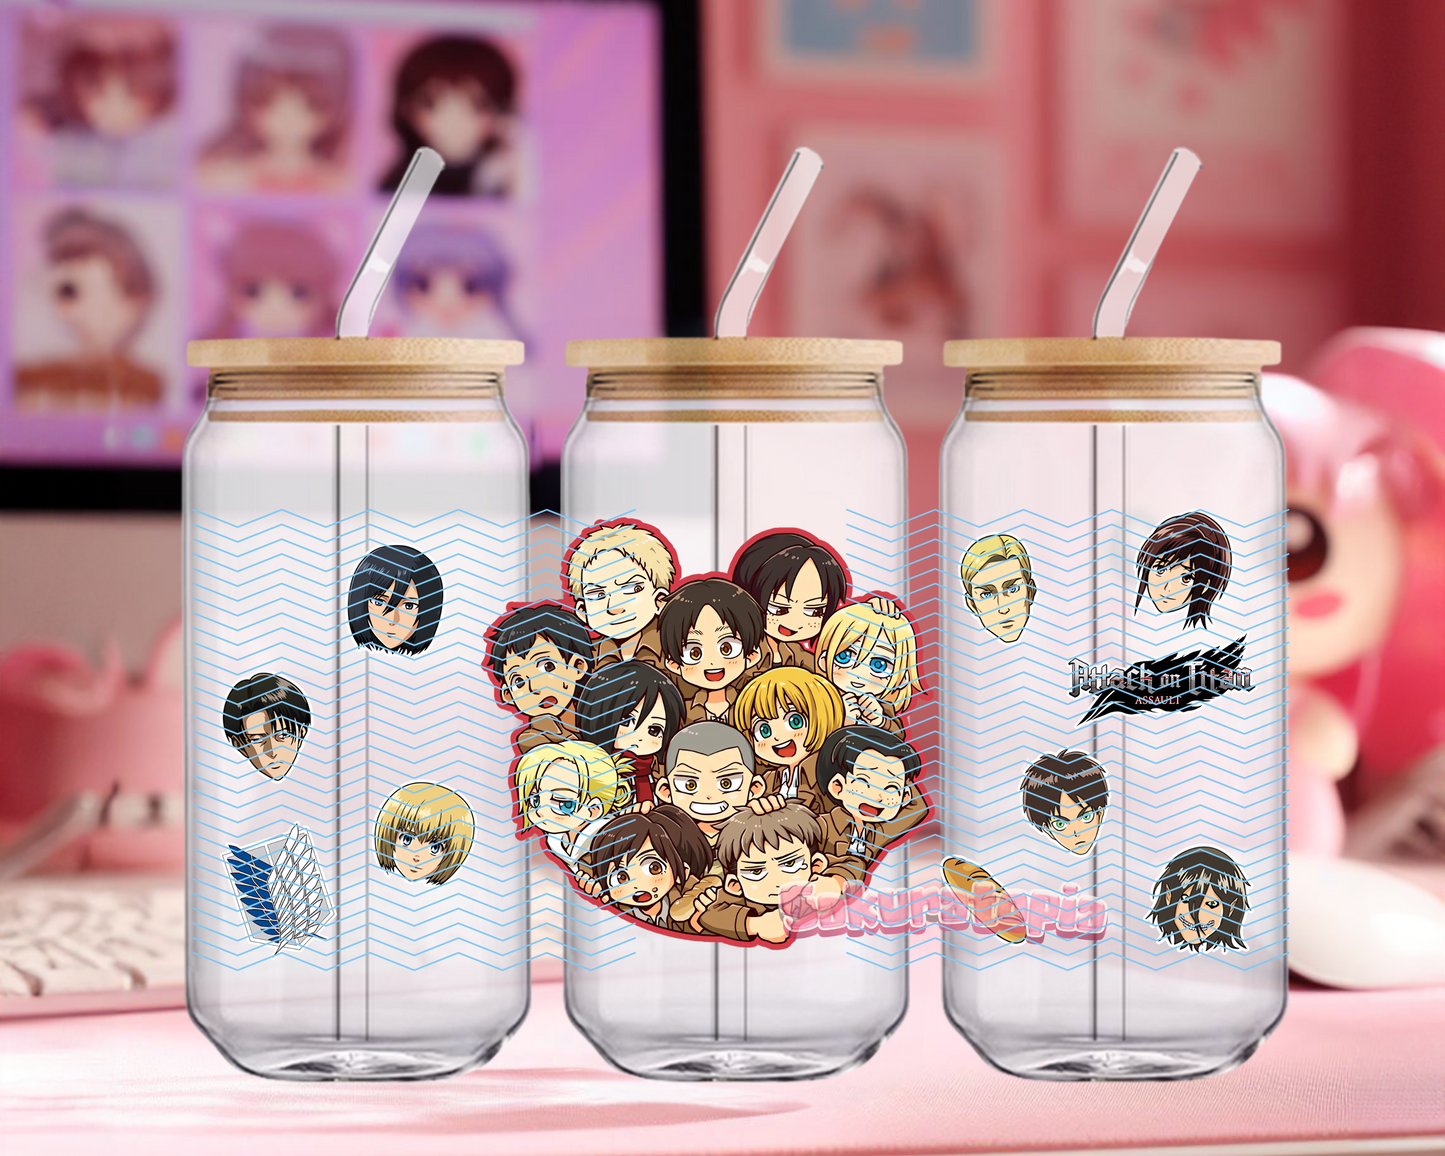 UVDTF Wraps attack on Titan Anime Wrap, Ready to Use Glass Cup Wrap